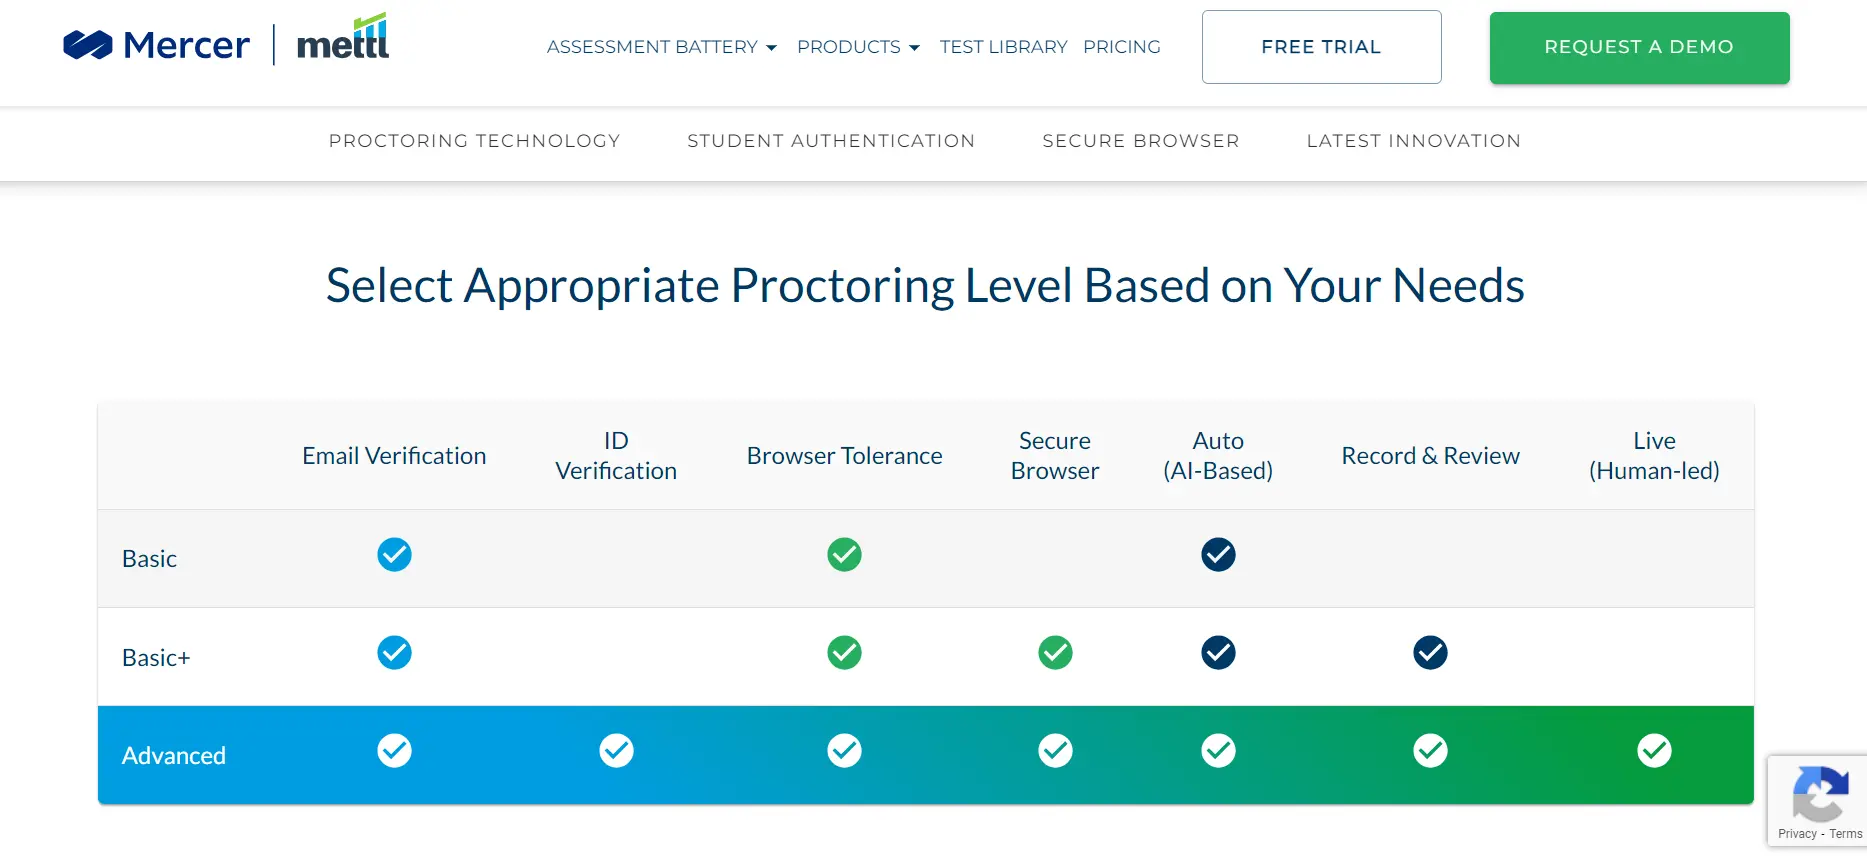 A screenshot from Mercer Mettl’s website, showing the different proctoring features of the platform